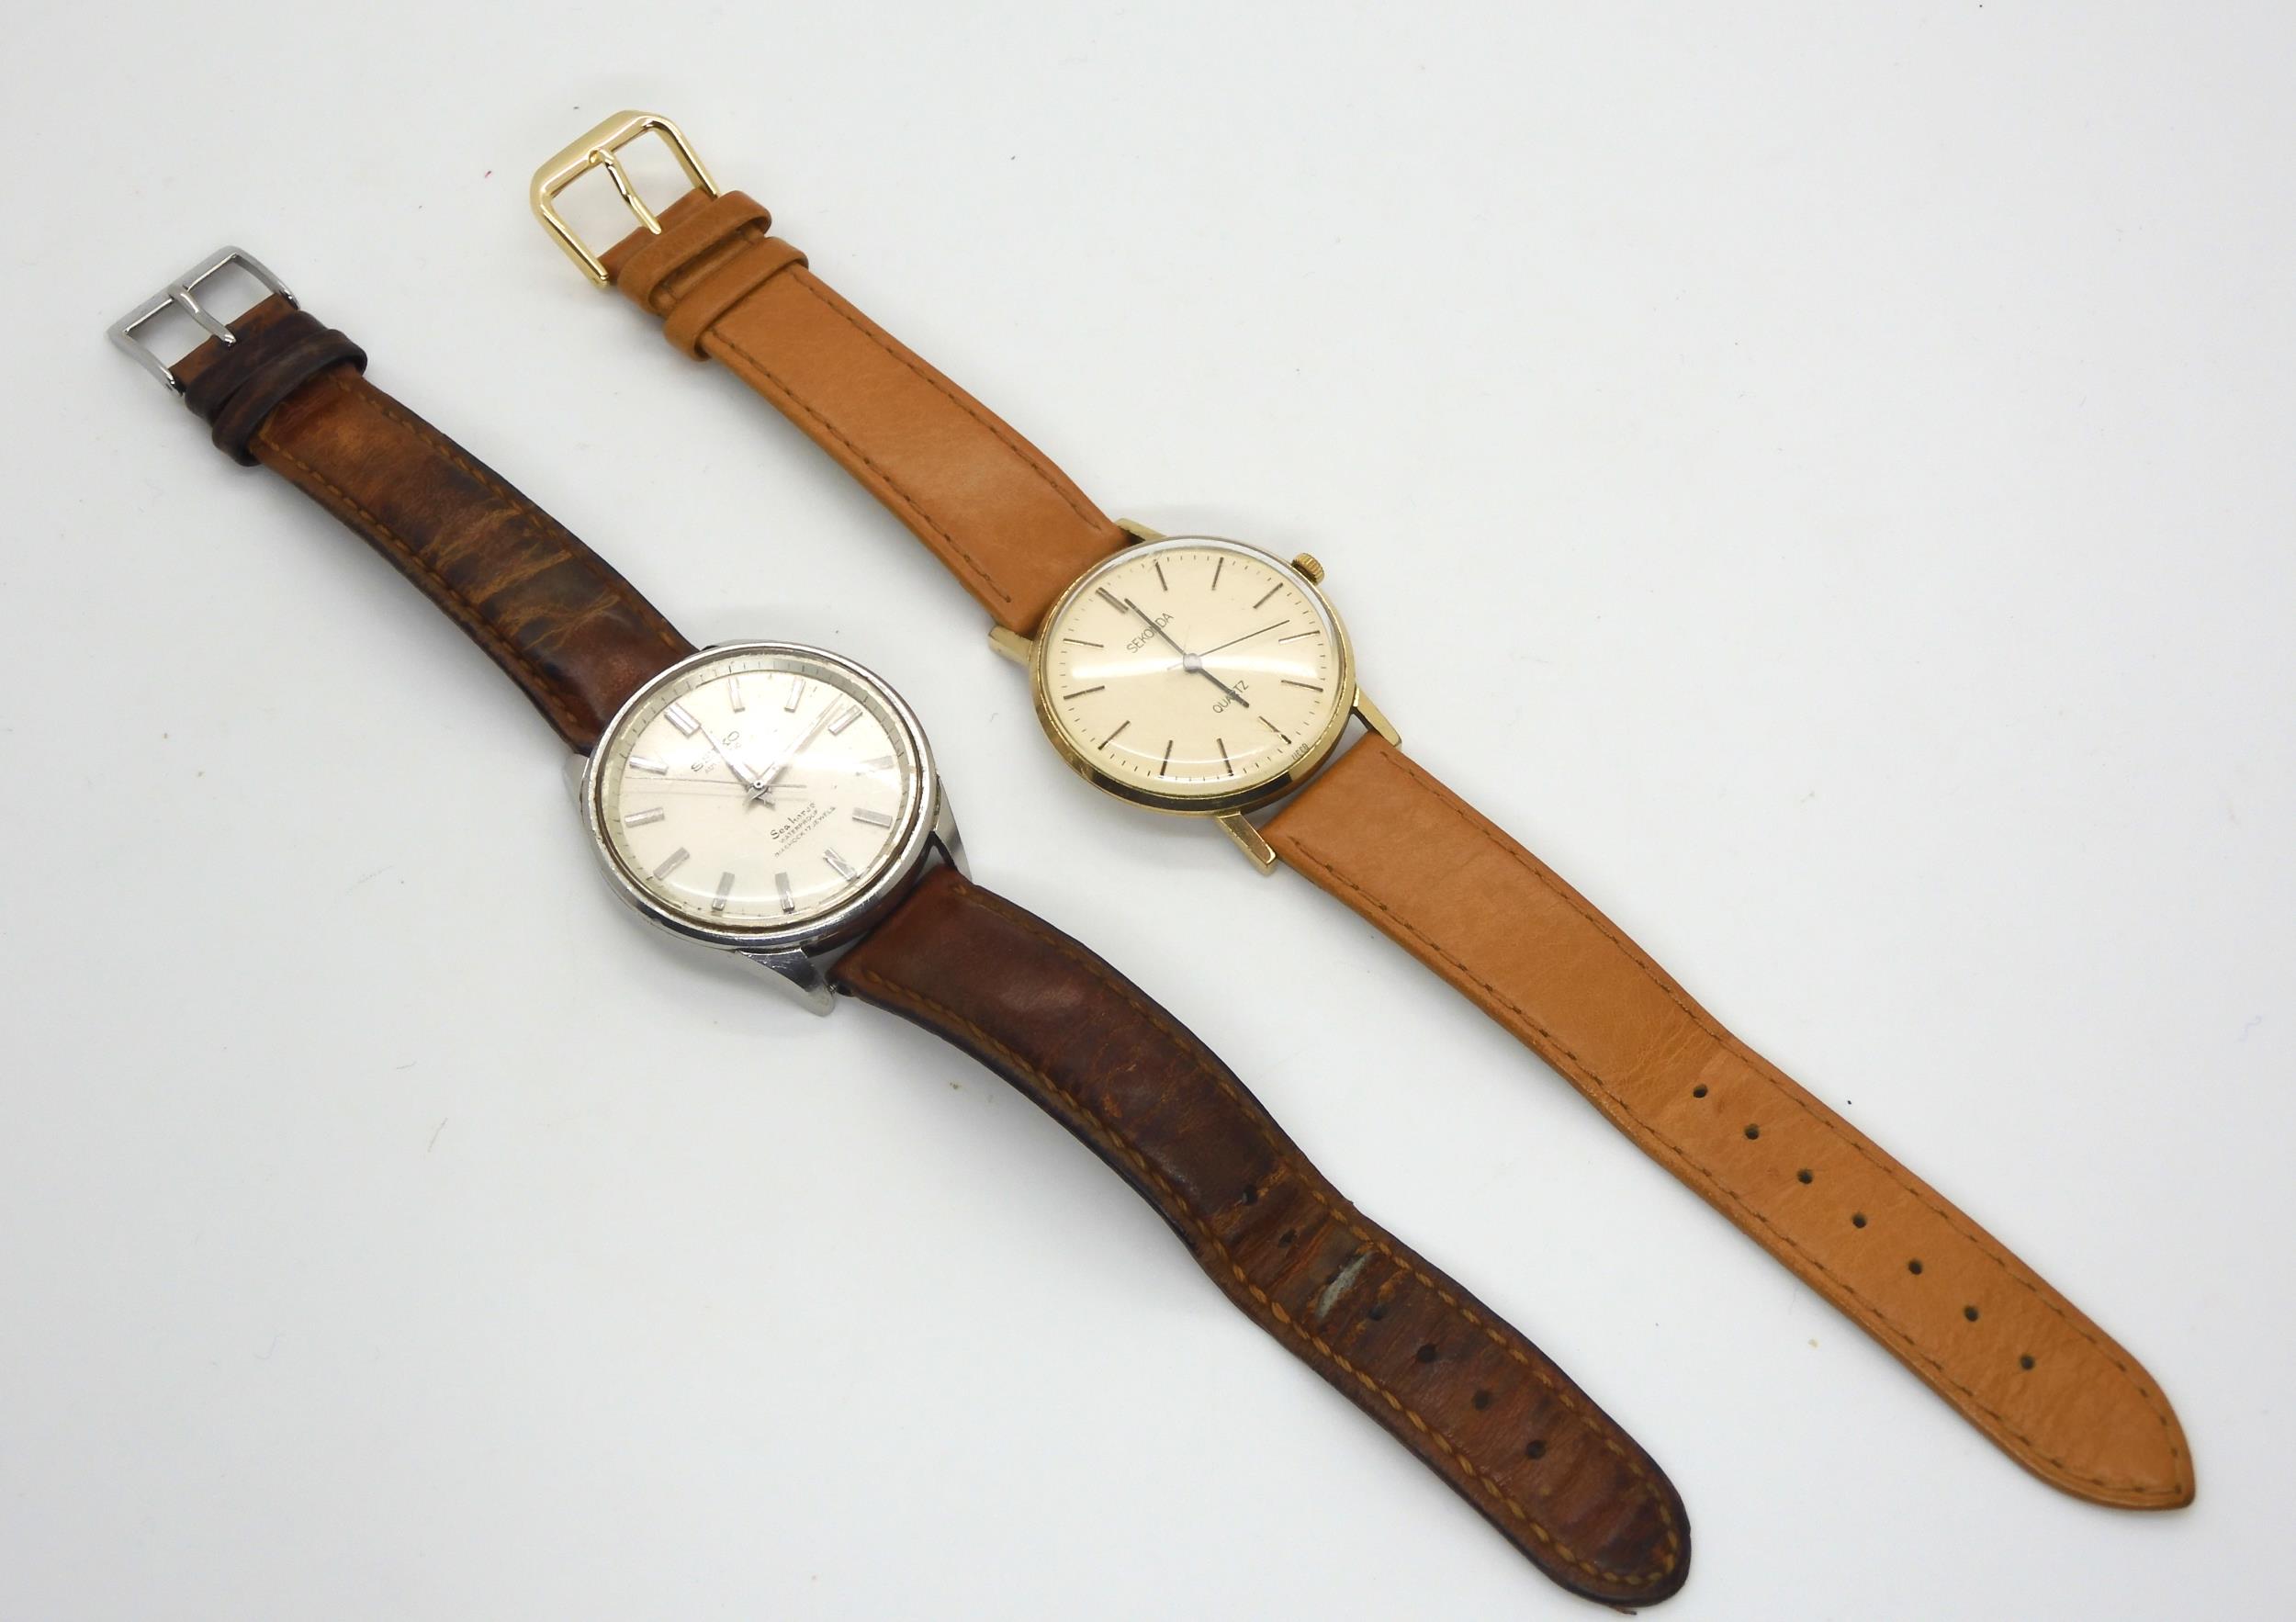 A retro Seiko Automatic Seahorse gents watch, together with a Sekonda Quartz gents watch Condition